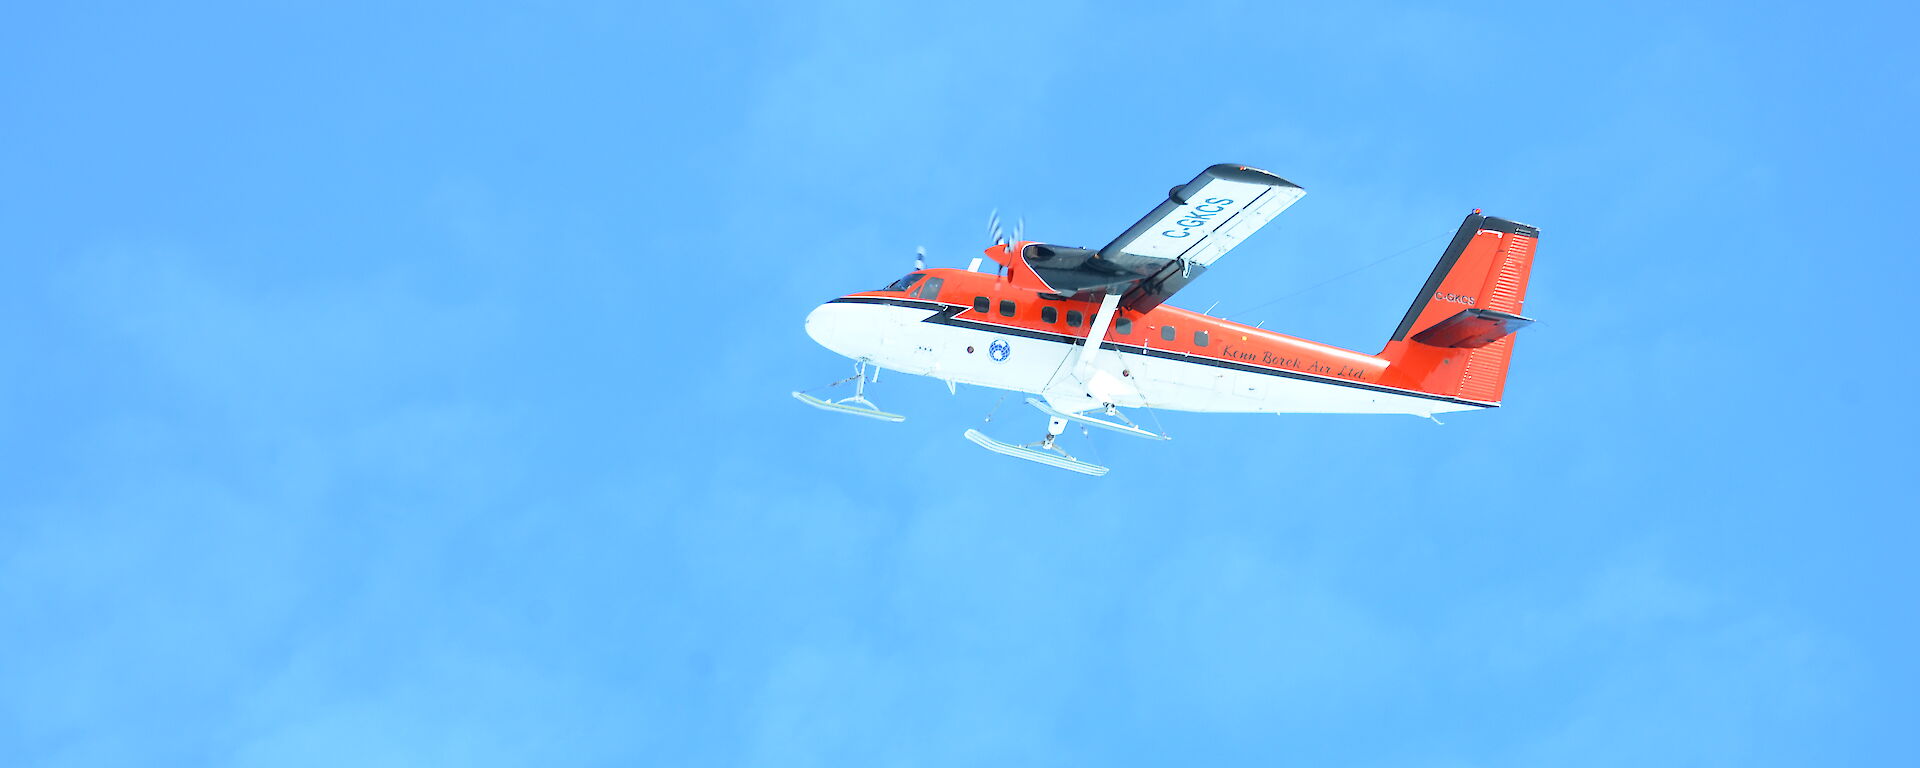 A DHC-6 Twin Otter prepares to land at Mawson Station.